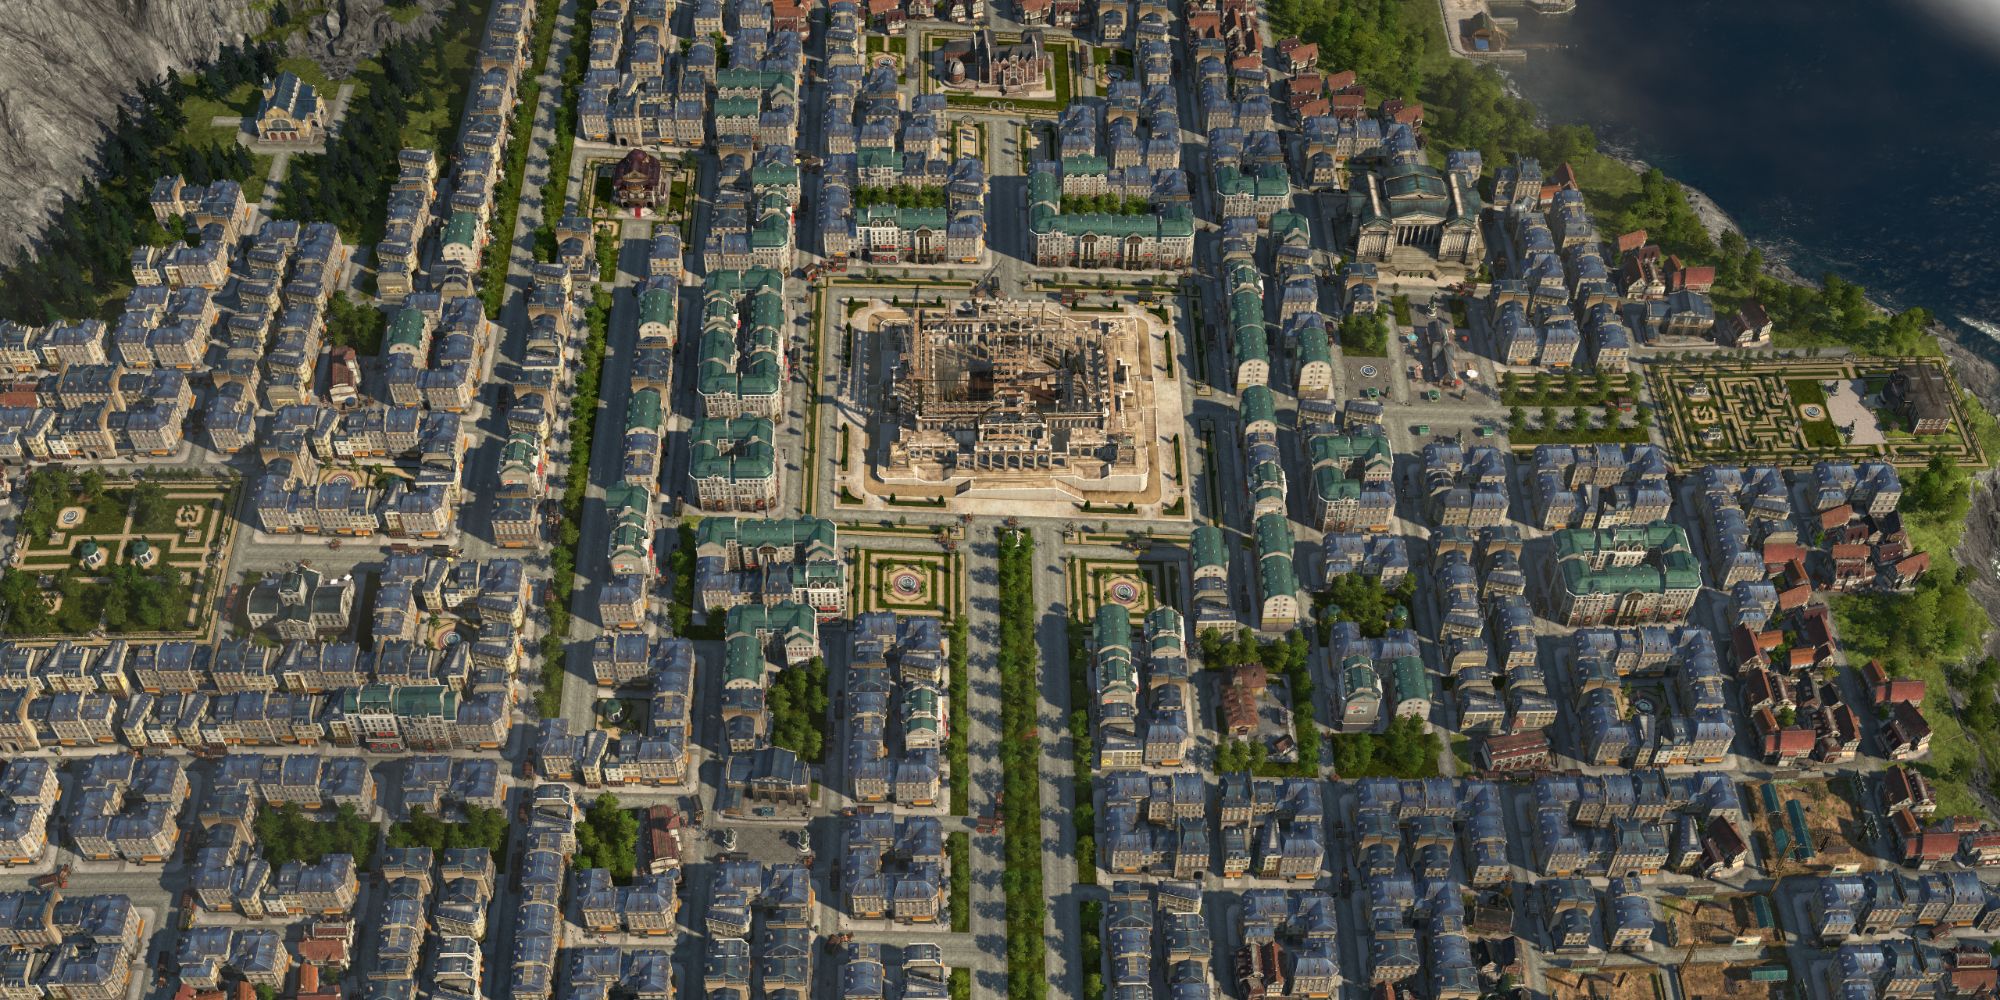 An top view of the city on the island in in Anno 1800